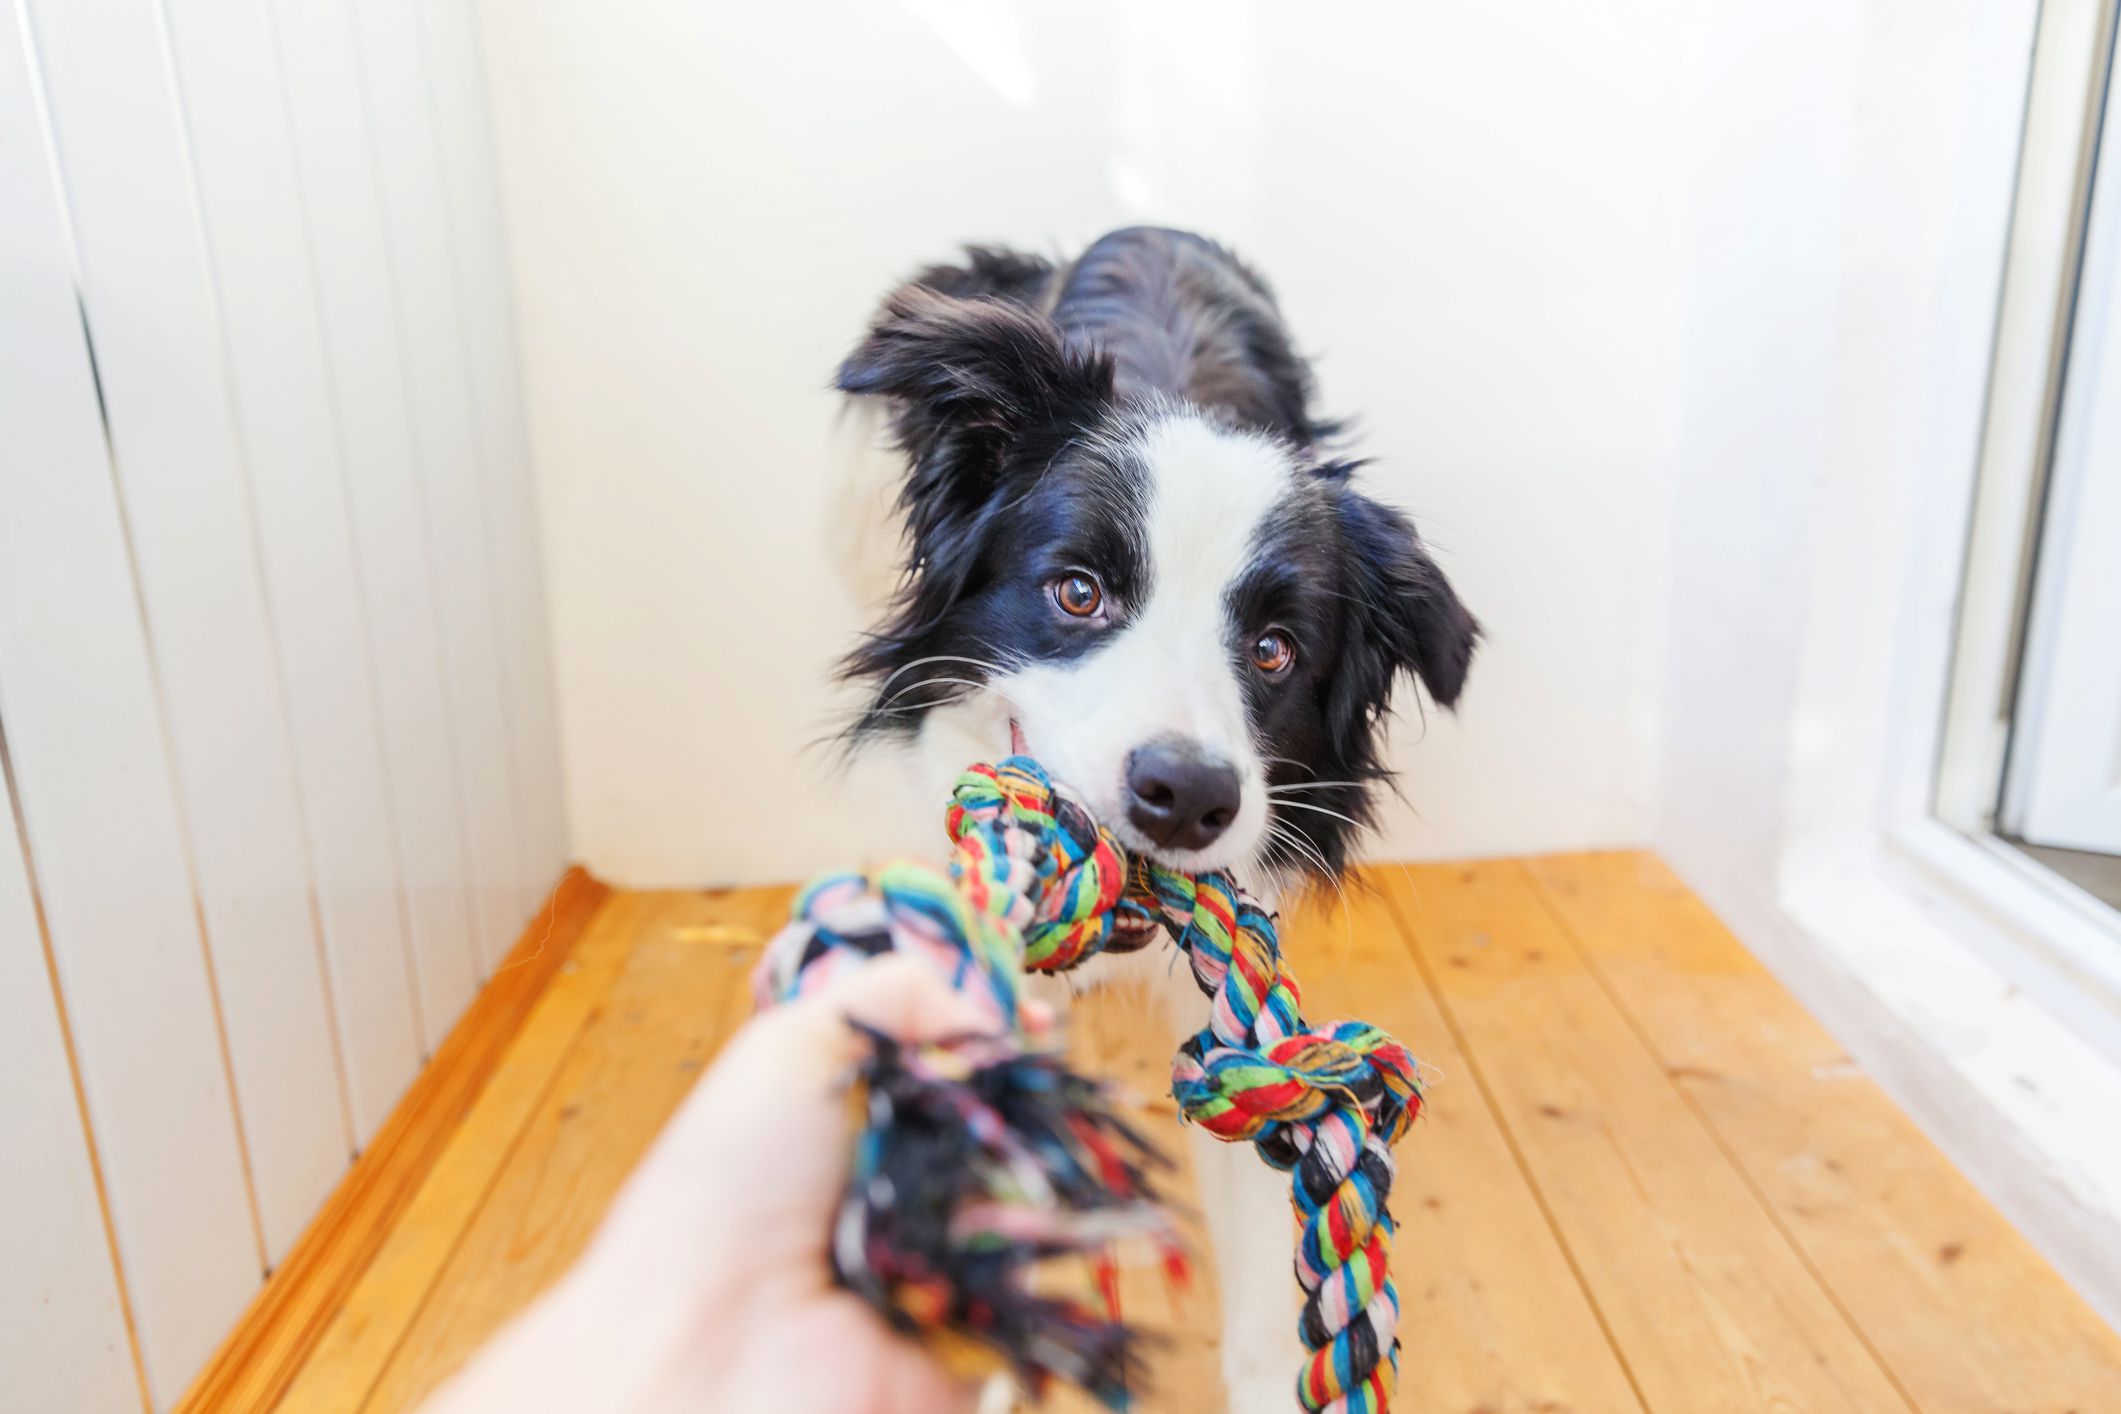 <p>Collies are another popular household pup. These are affectionate, intelligent mid-sized dogs who prefer to spend half their day running and the other half cuddling. </p>